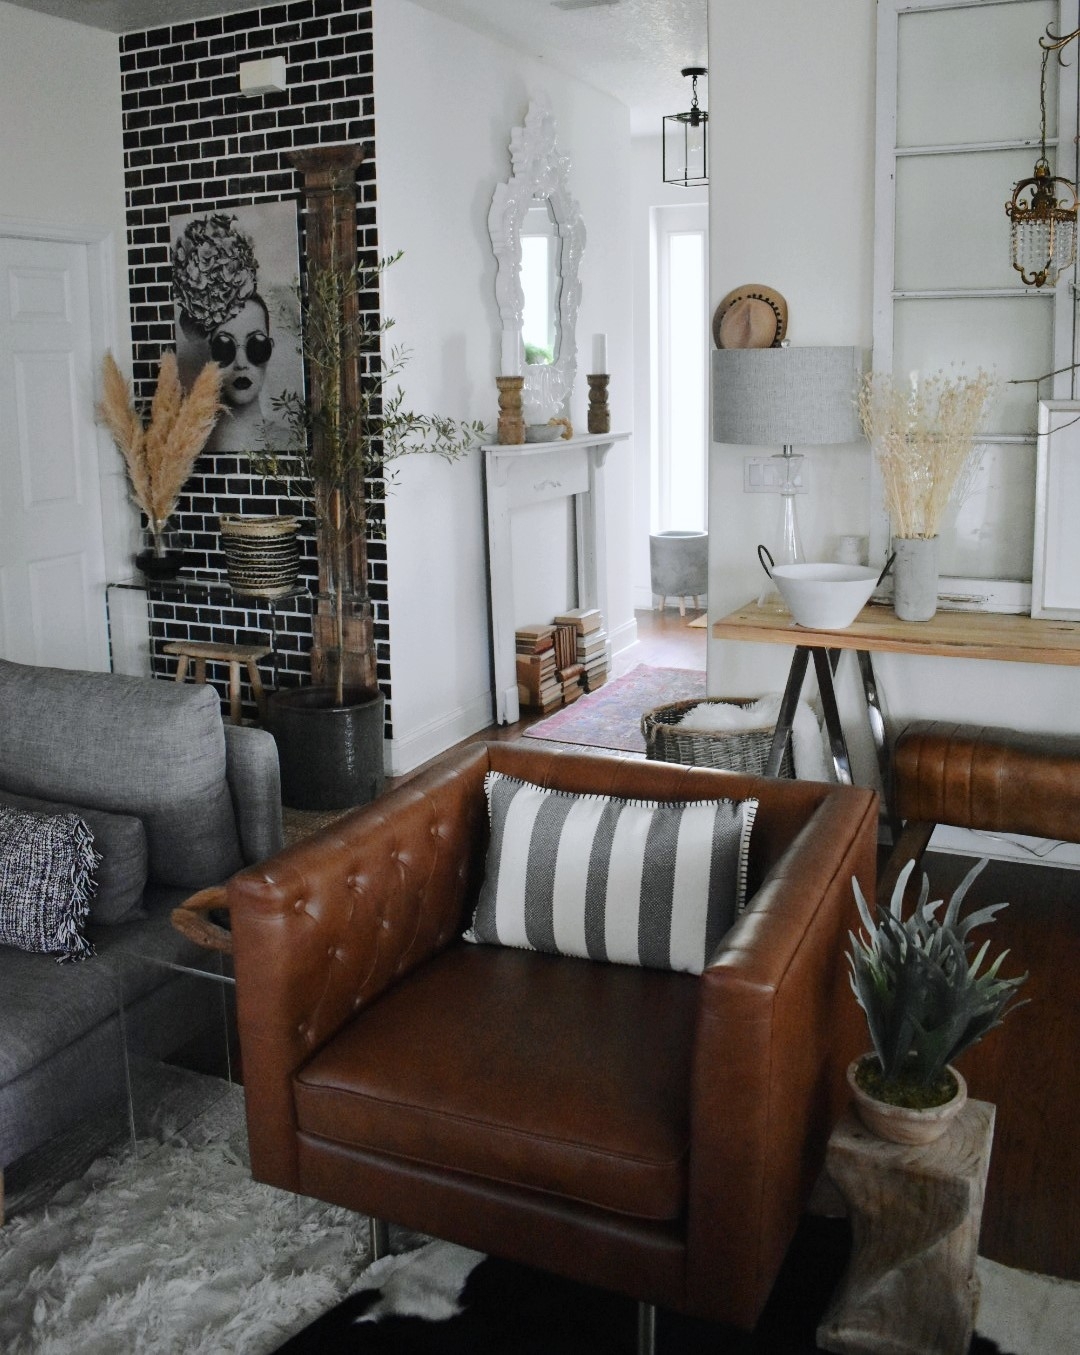 Entryway Foyer Decor Design Industrial Modern Farmhouse Rustic Glam Boho Scandinavian Eclectic Gray Black White Decor Texture Jute Basket Art Vintage Rug Leather Camel Chair Wood Living Room Pampas Grass At Home Store